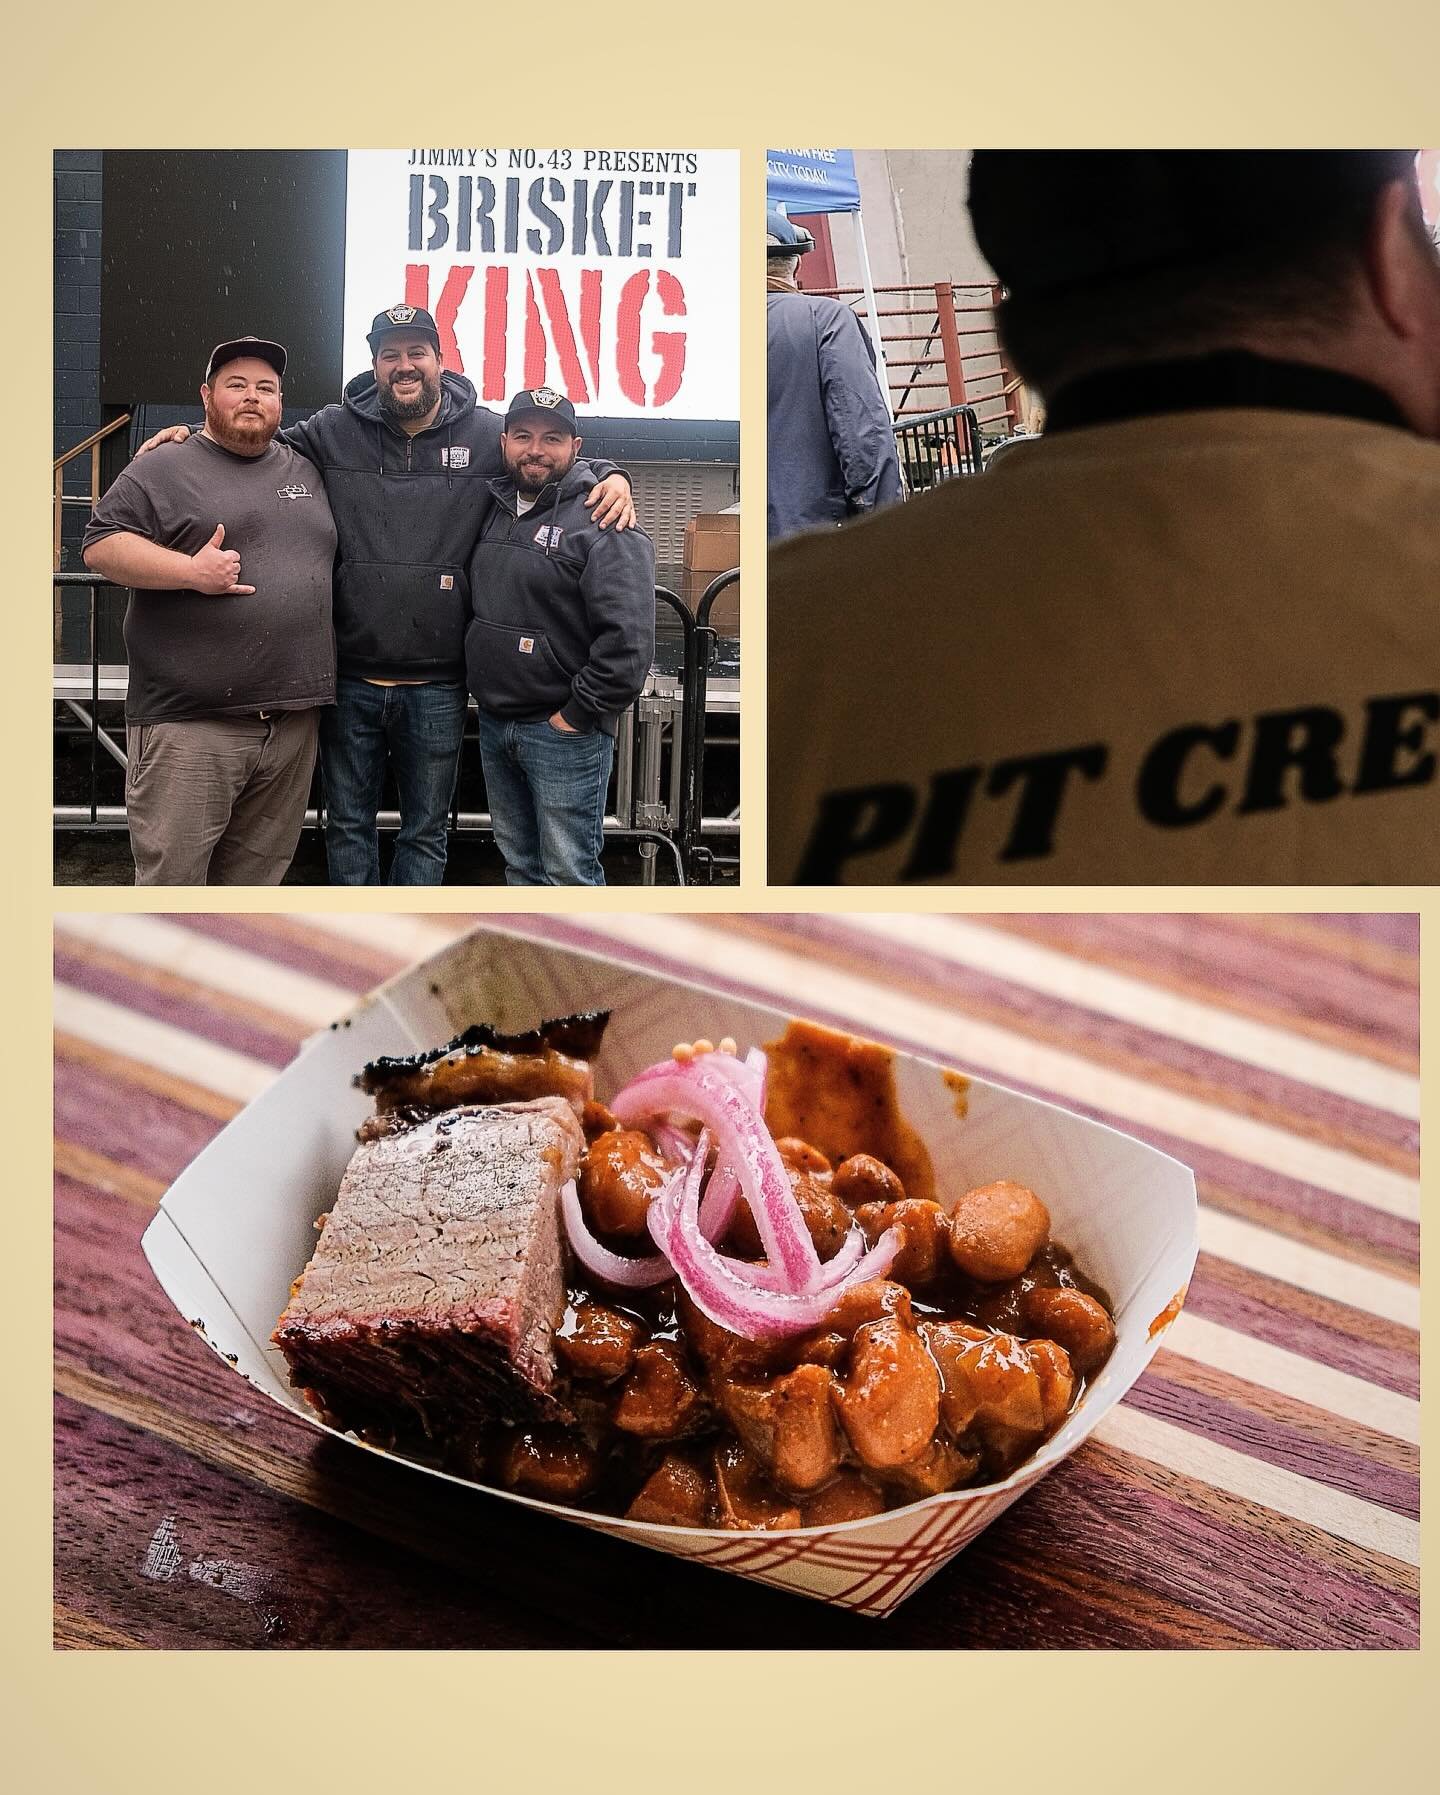 Been running full speed since @brisketkingnyc. It was a special day thanks to @jimmypotsandpans and @pig_beach_queens team. Thanks to all the people who showed us love that day, we felt it!

Now back to our regular scheduled programming&hellip; @seca